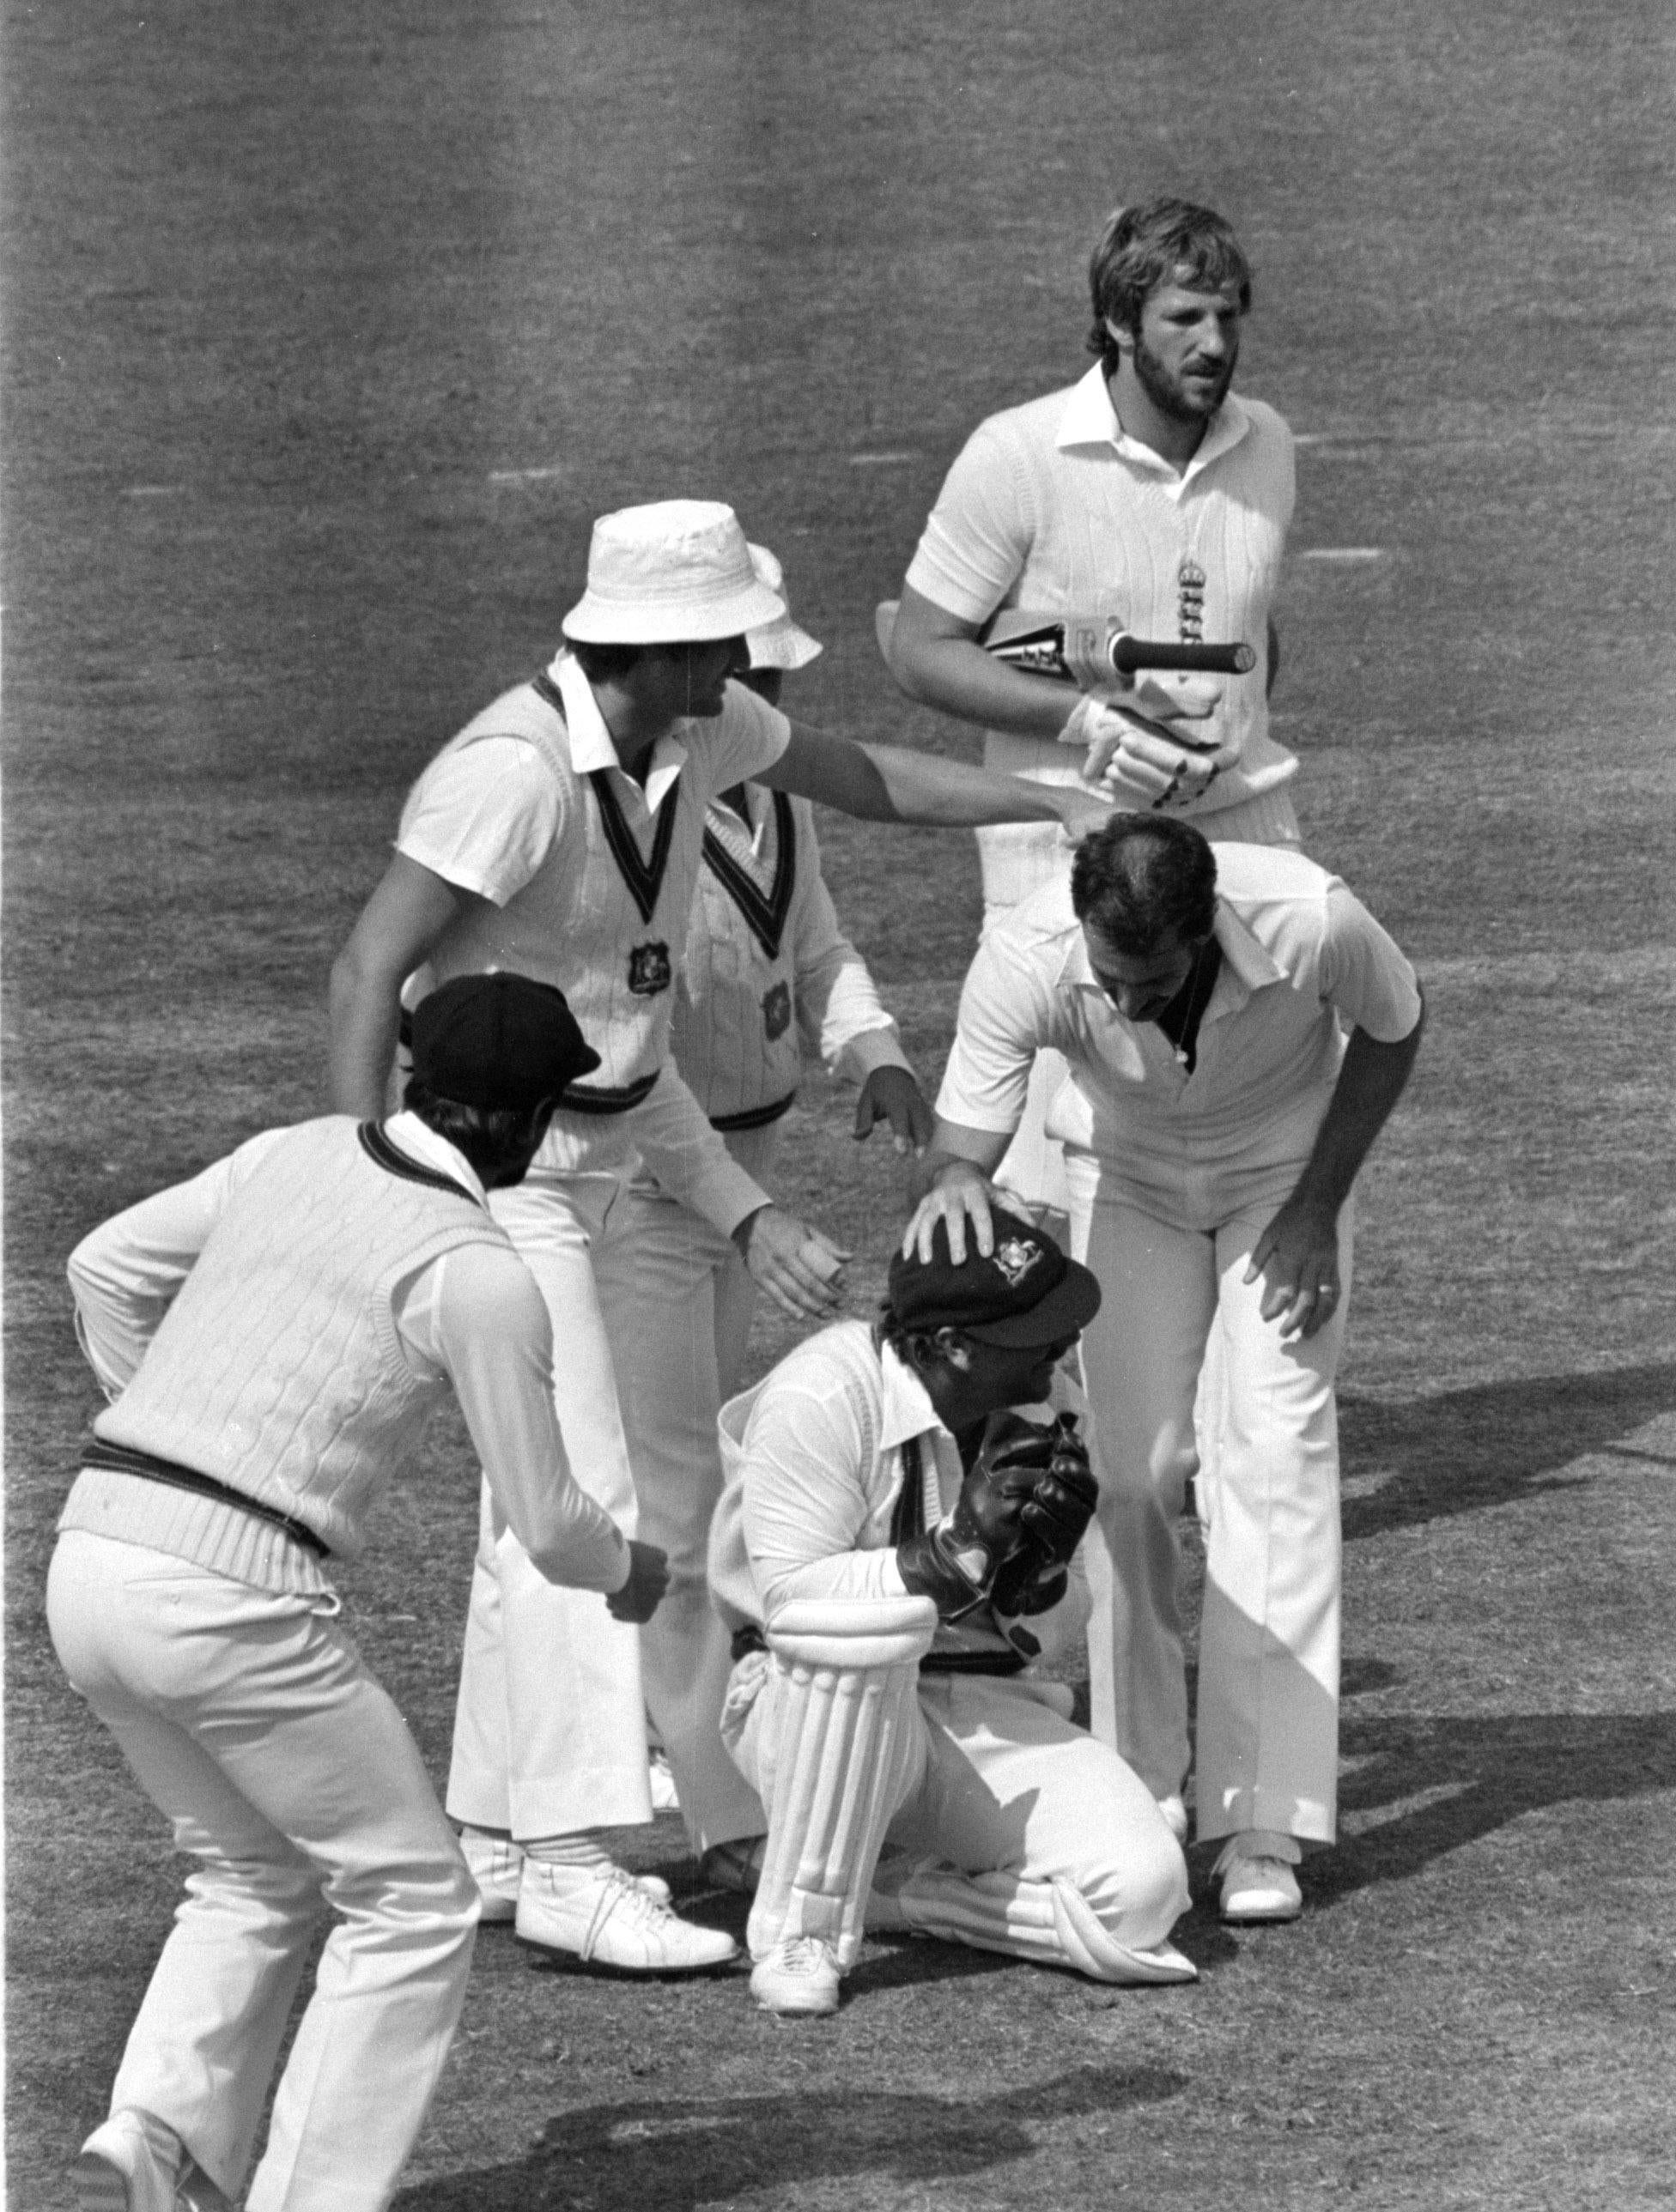 Ian Botham heads off after being caught by Rod Marsh while Dennis Lillee (hatless), the bowler, congratulates Marsh (PA)